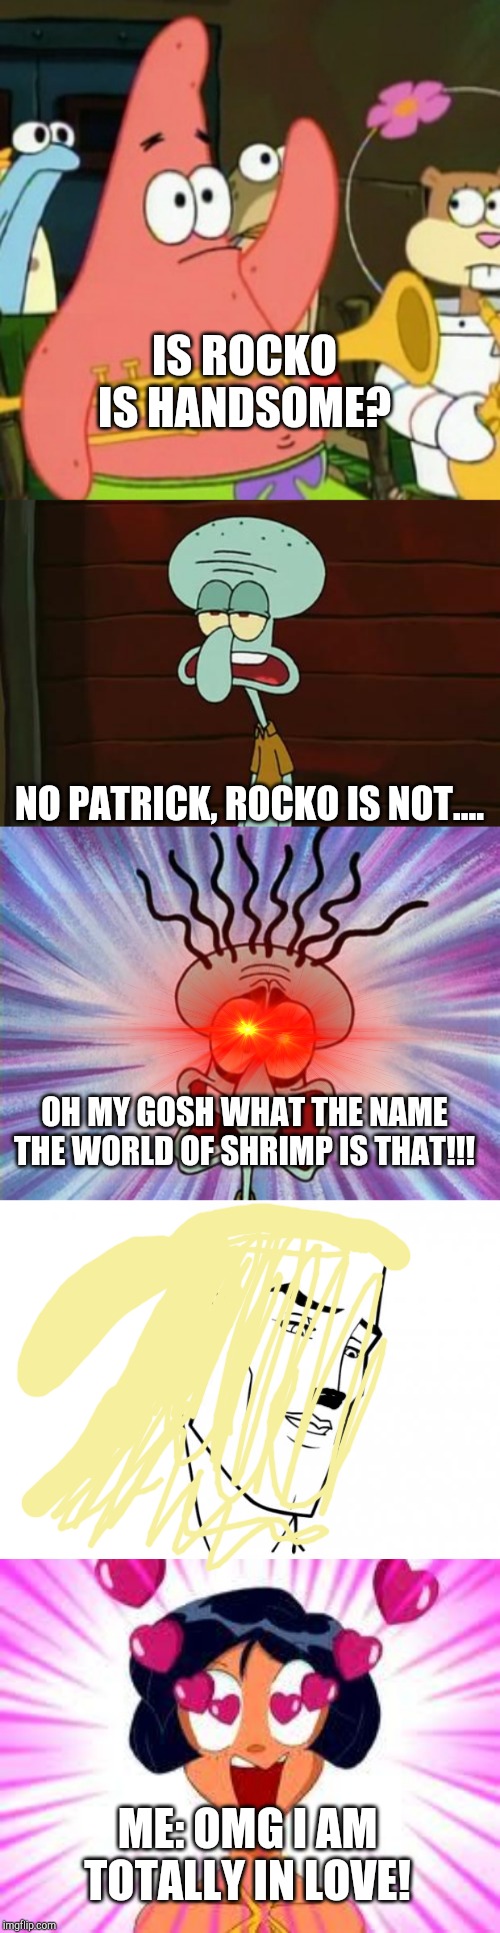 IS ROCKO IS HANDSOME? NO PATRICK, ROCKO IS NOT.... OH MY GOSH WHAT THE NAME THE WORLD OF SHRIMP IS THAT!!! ME: OMG I AM TOTALLY IN LOVE! | image tagged in memes,no patrick,tottally in love,no patrick mayonnaise is not a instrument,handsome face,rocko | made w/ Imgflip meme maker